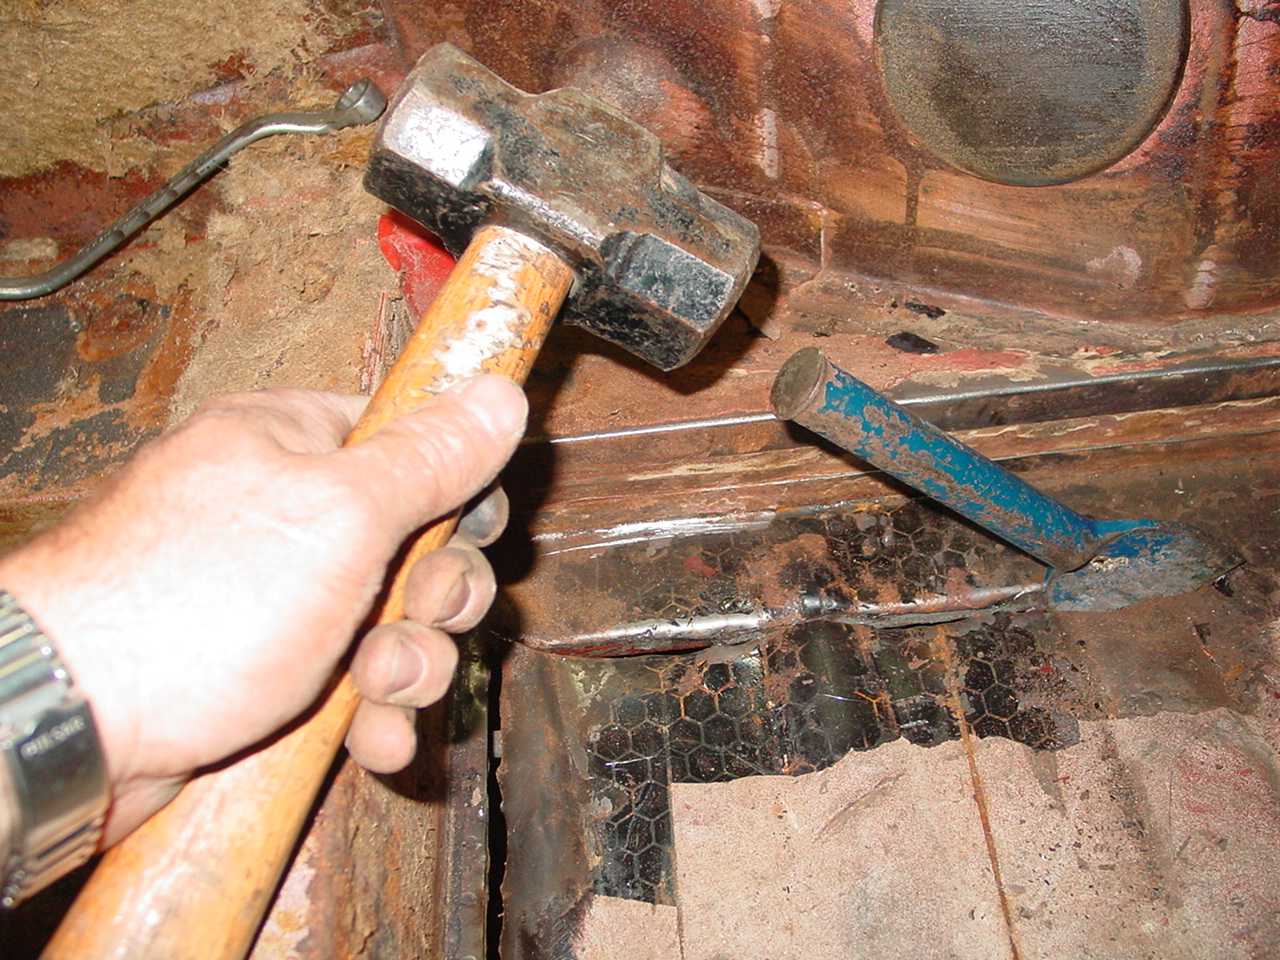 Hammer and chisel was the neatest and safest way of removing the old floors.  No sparks flying from grinding wheels or cutting torches and the finish was neat & tidy.